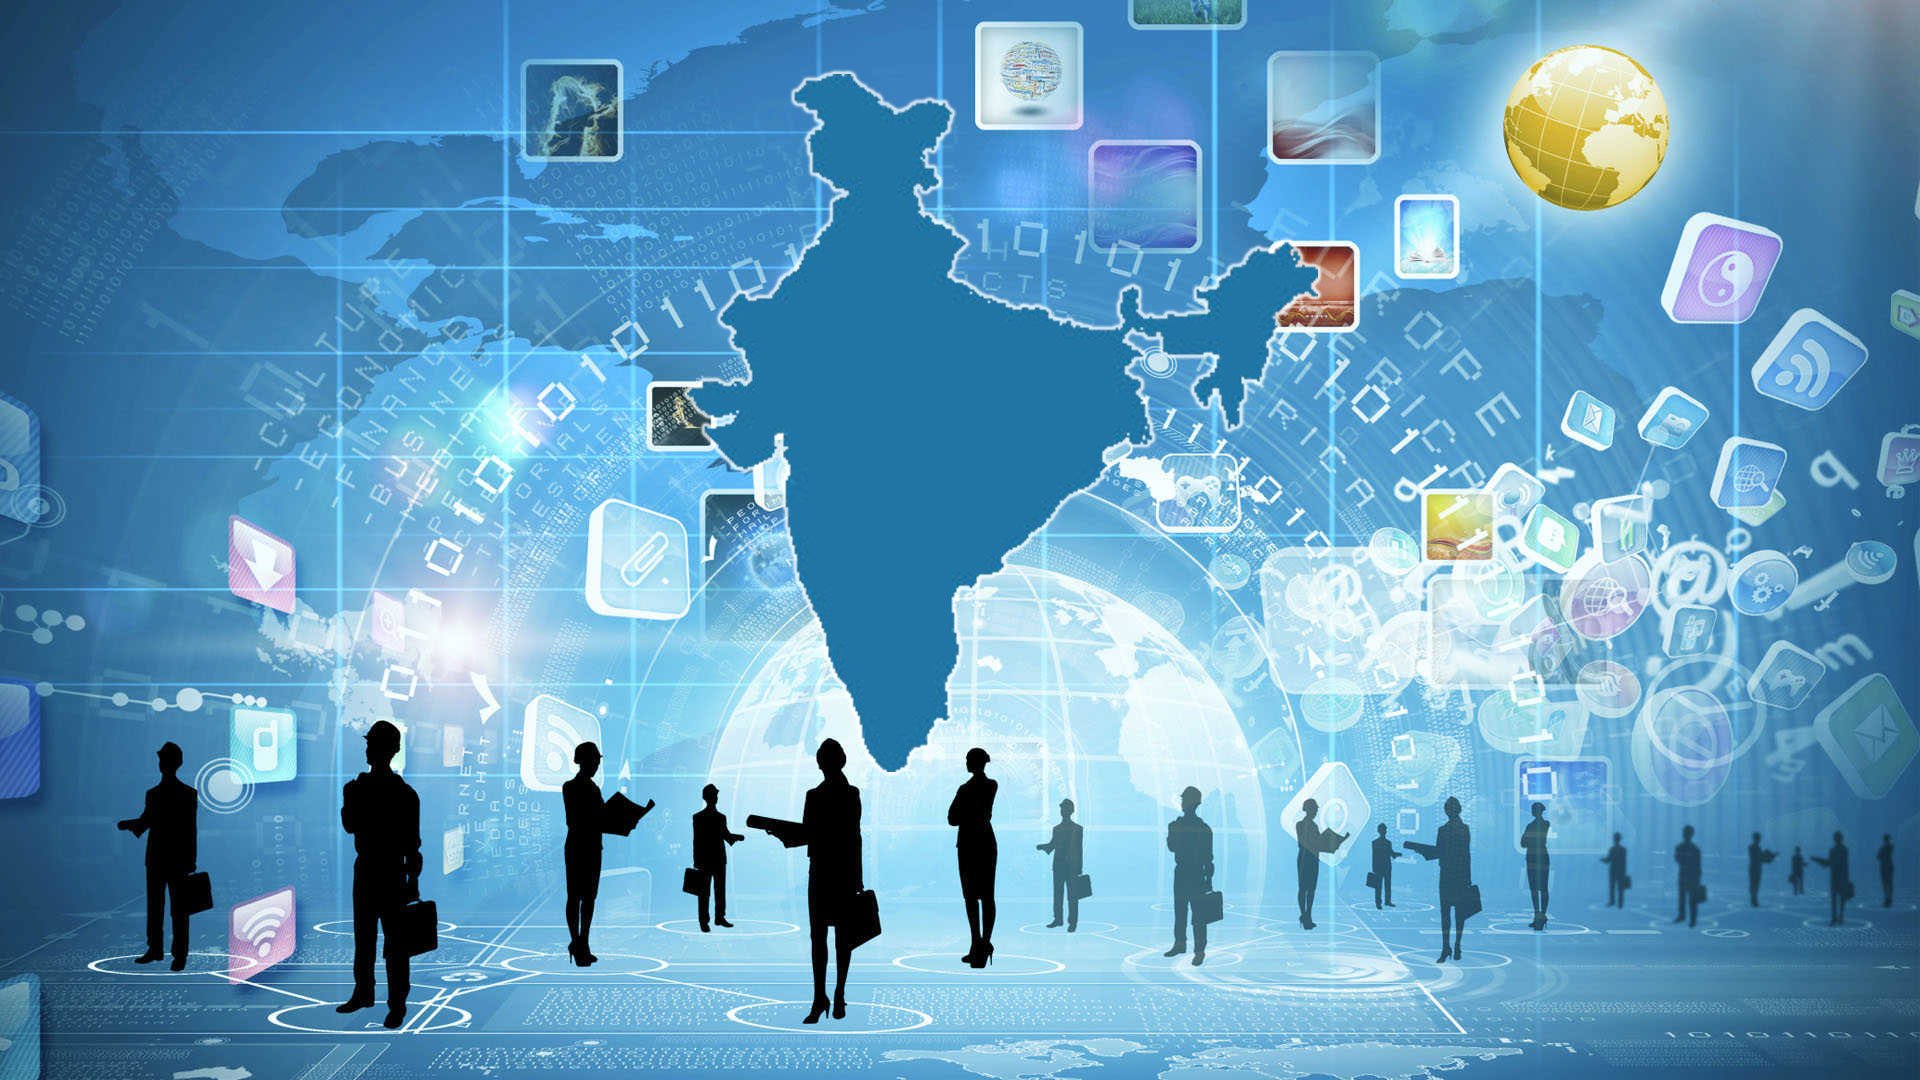 Will Rise In India's Digital Economy Going To Play A Role In Increasing Employment?